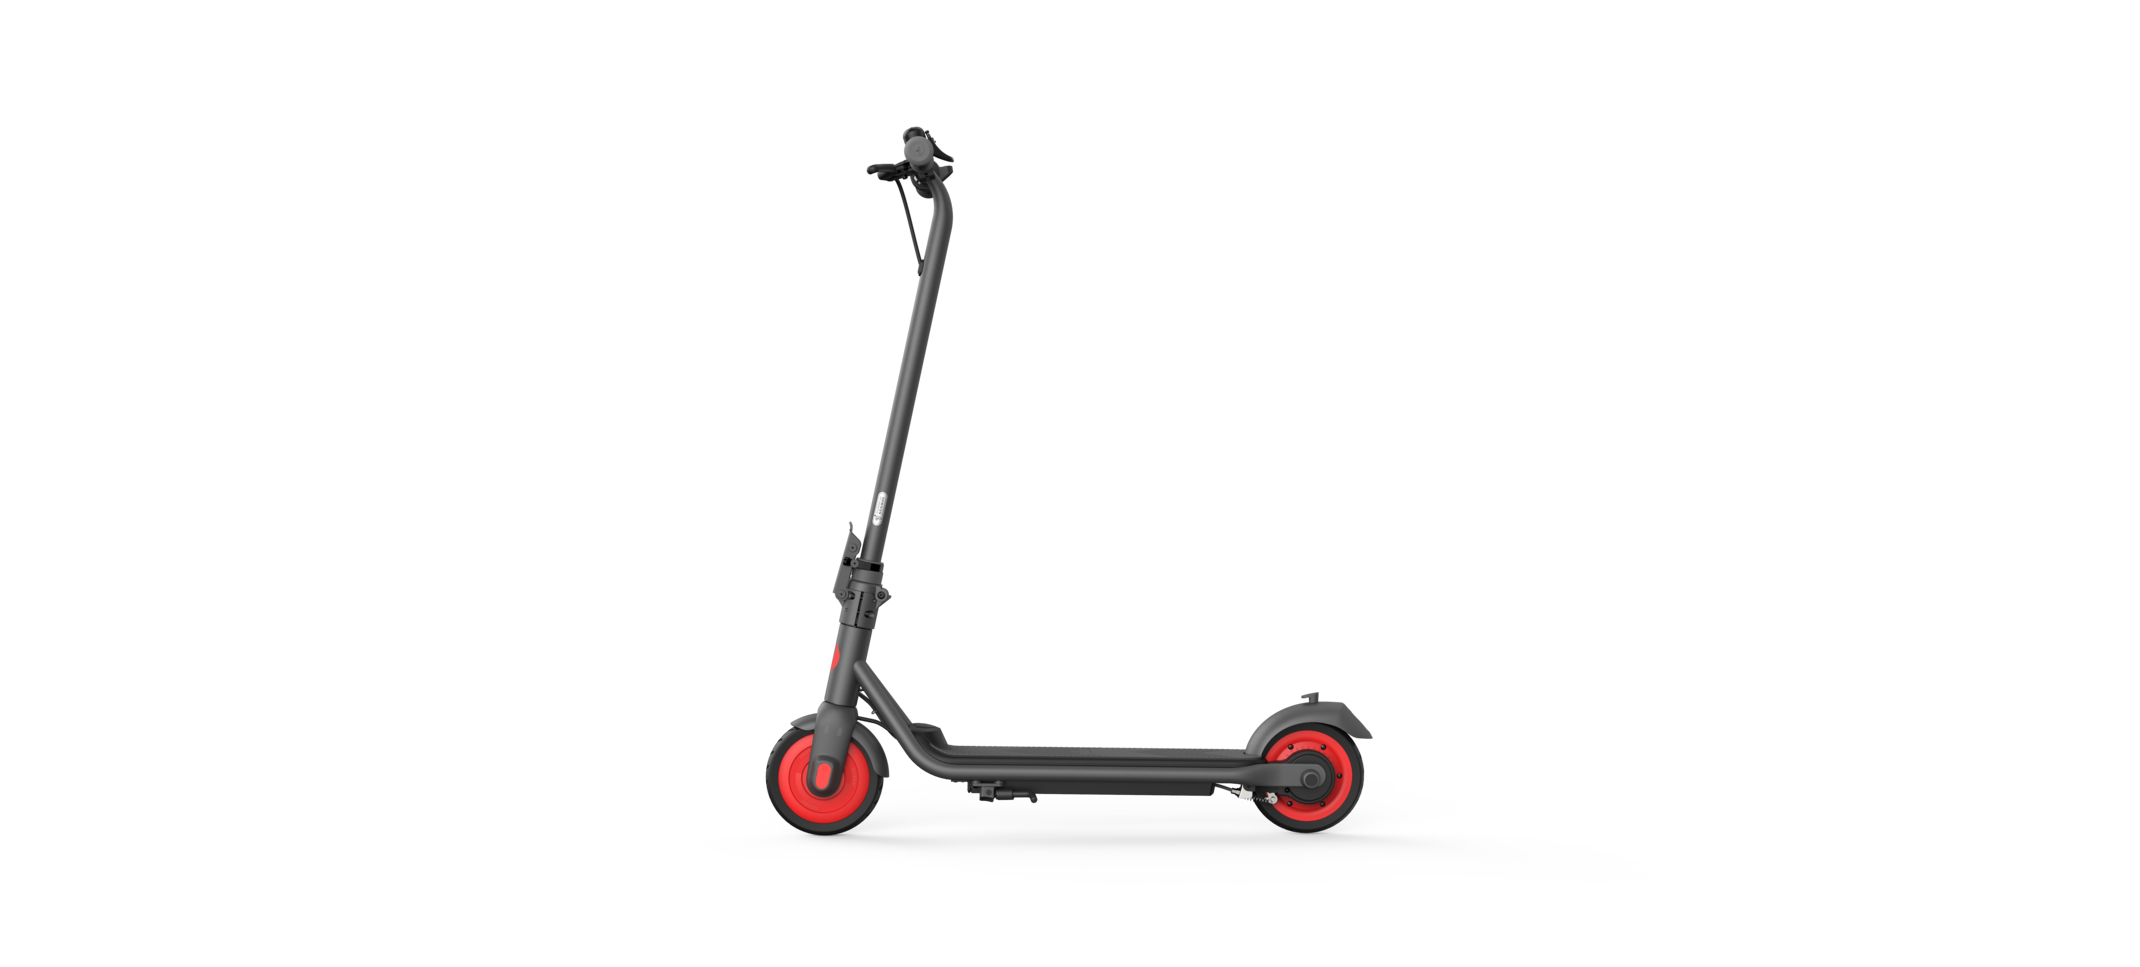 Ninebot by Segway Zing A20 16 km/h Nero, Rosso